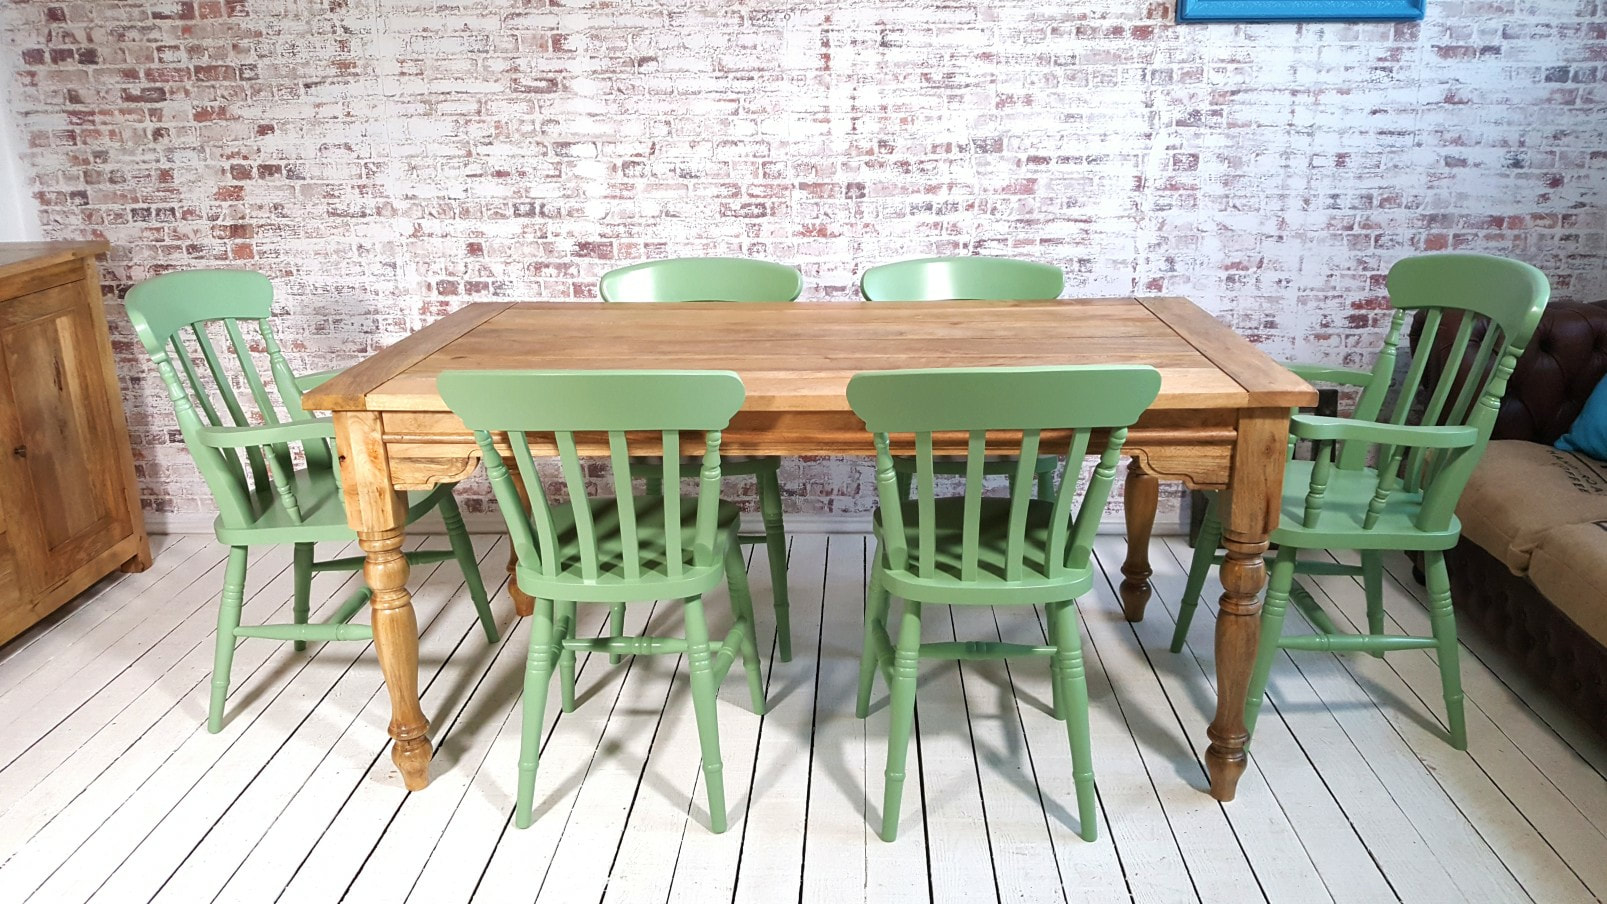 Large Rustic Extending Kitchen Dining Table Set With Turned Legs Painted Chairs